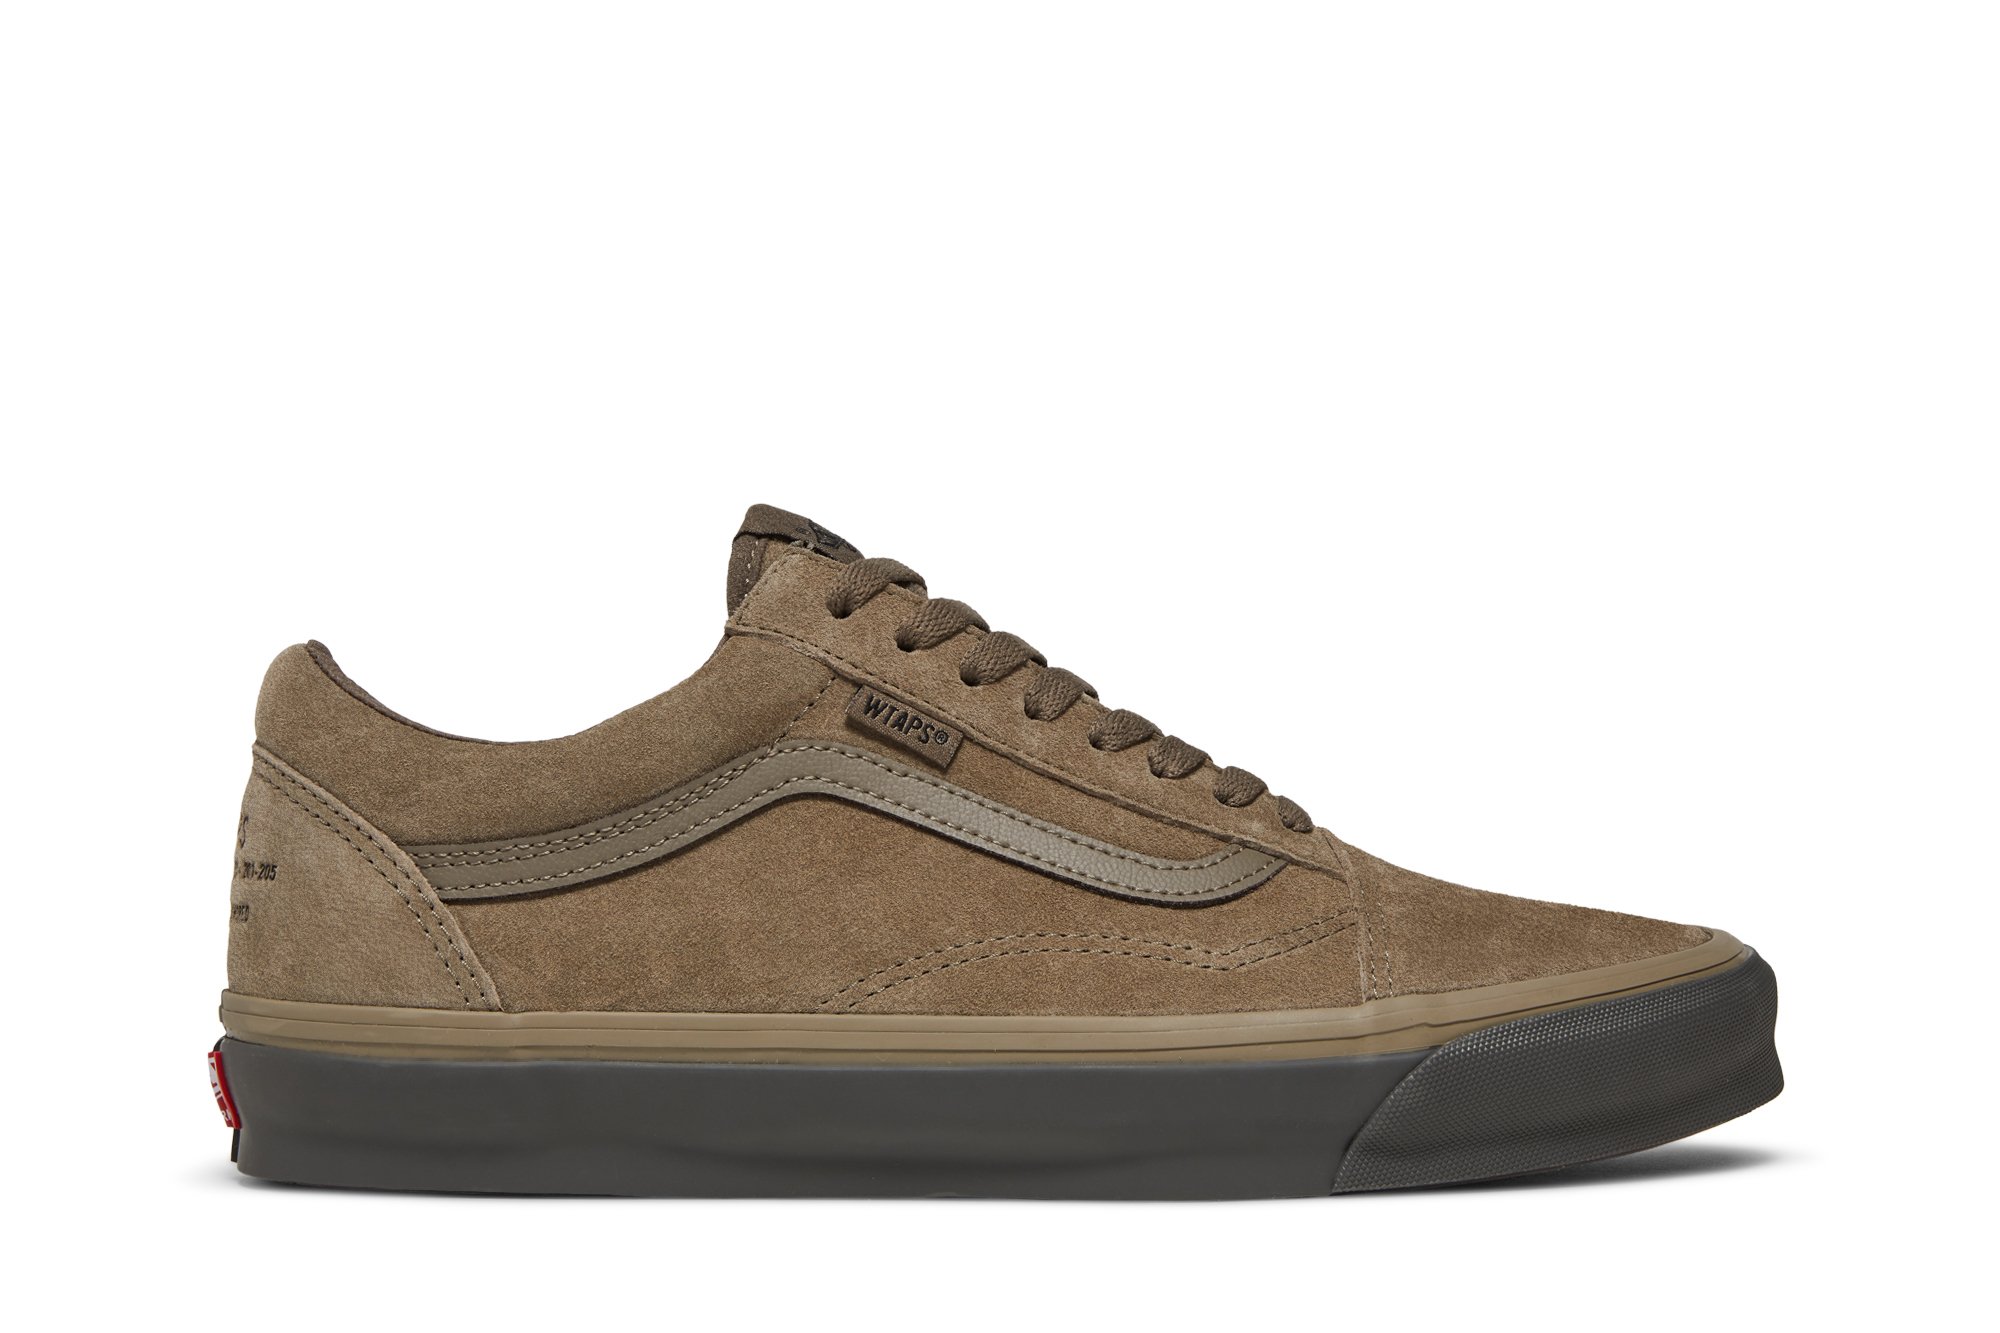 Buy WTAPS x OG Old Skool LX 'Coyote' - VN0A4P3XBMD | GOAT